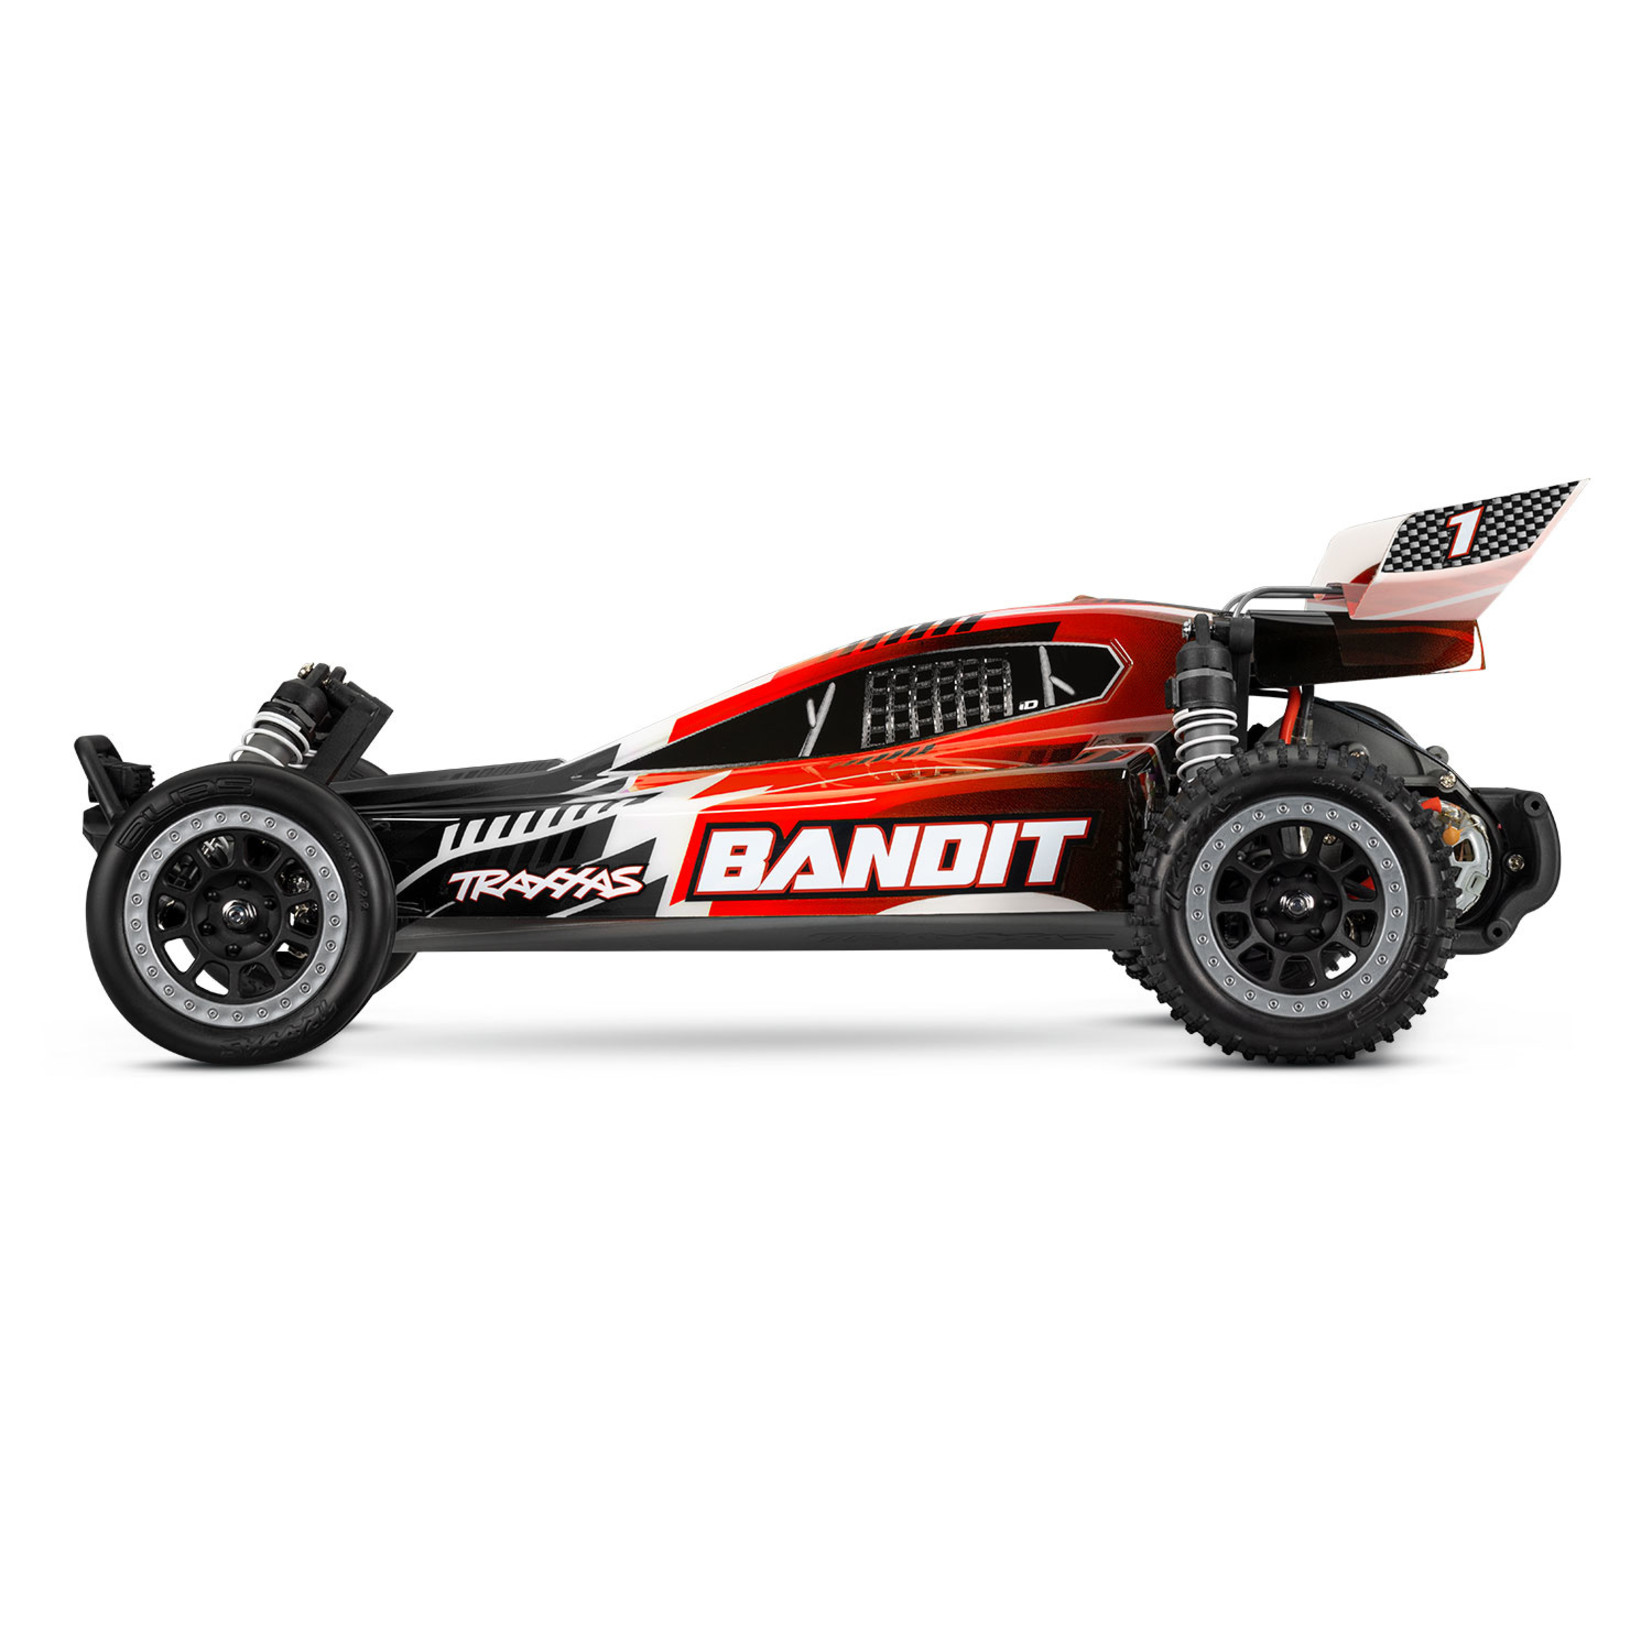 Traxxas Bandit: 1/10 Scale Off-Road 2WD Buggy with LED lights and NiMH battery & charger